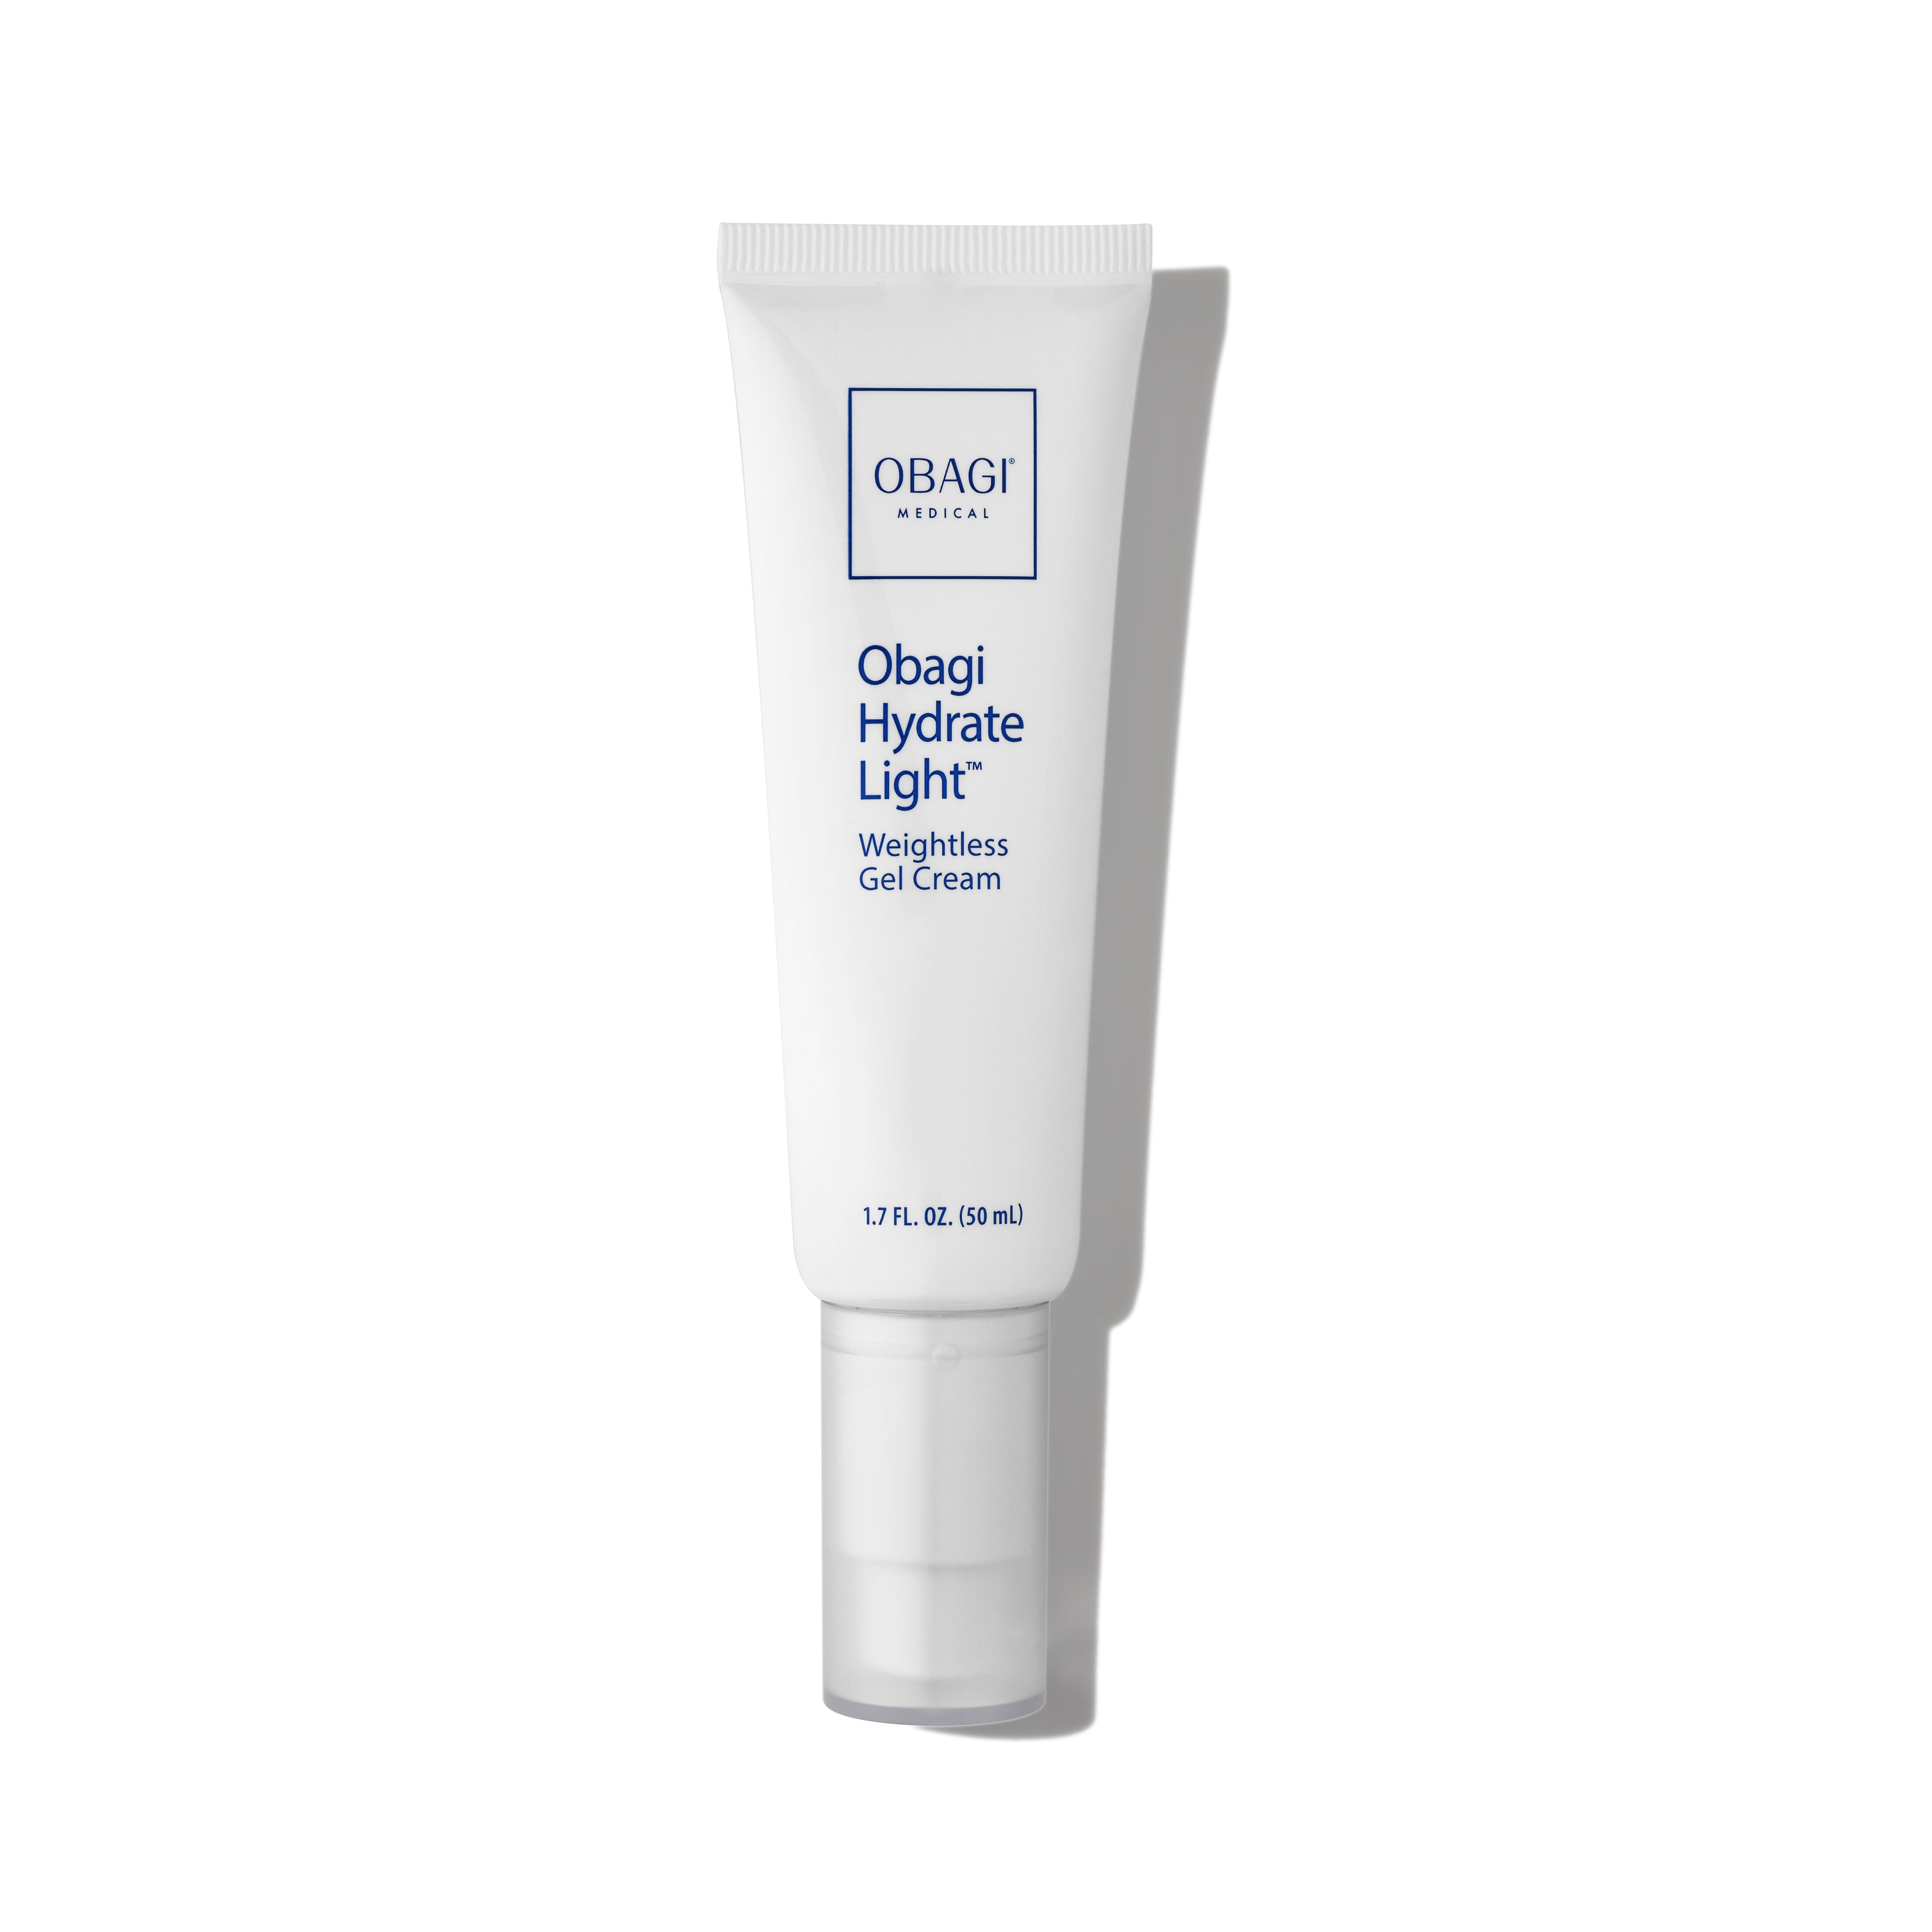 Obagi Hydrate Light Weightless Gel Cream Lotion & Moisturizer Obagi 1.7 oz. Shop at Exclusive Beauty Club